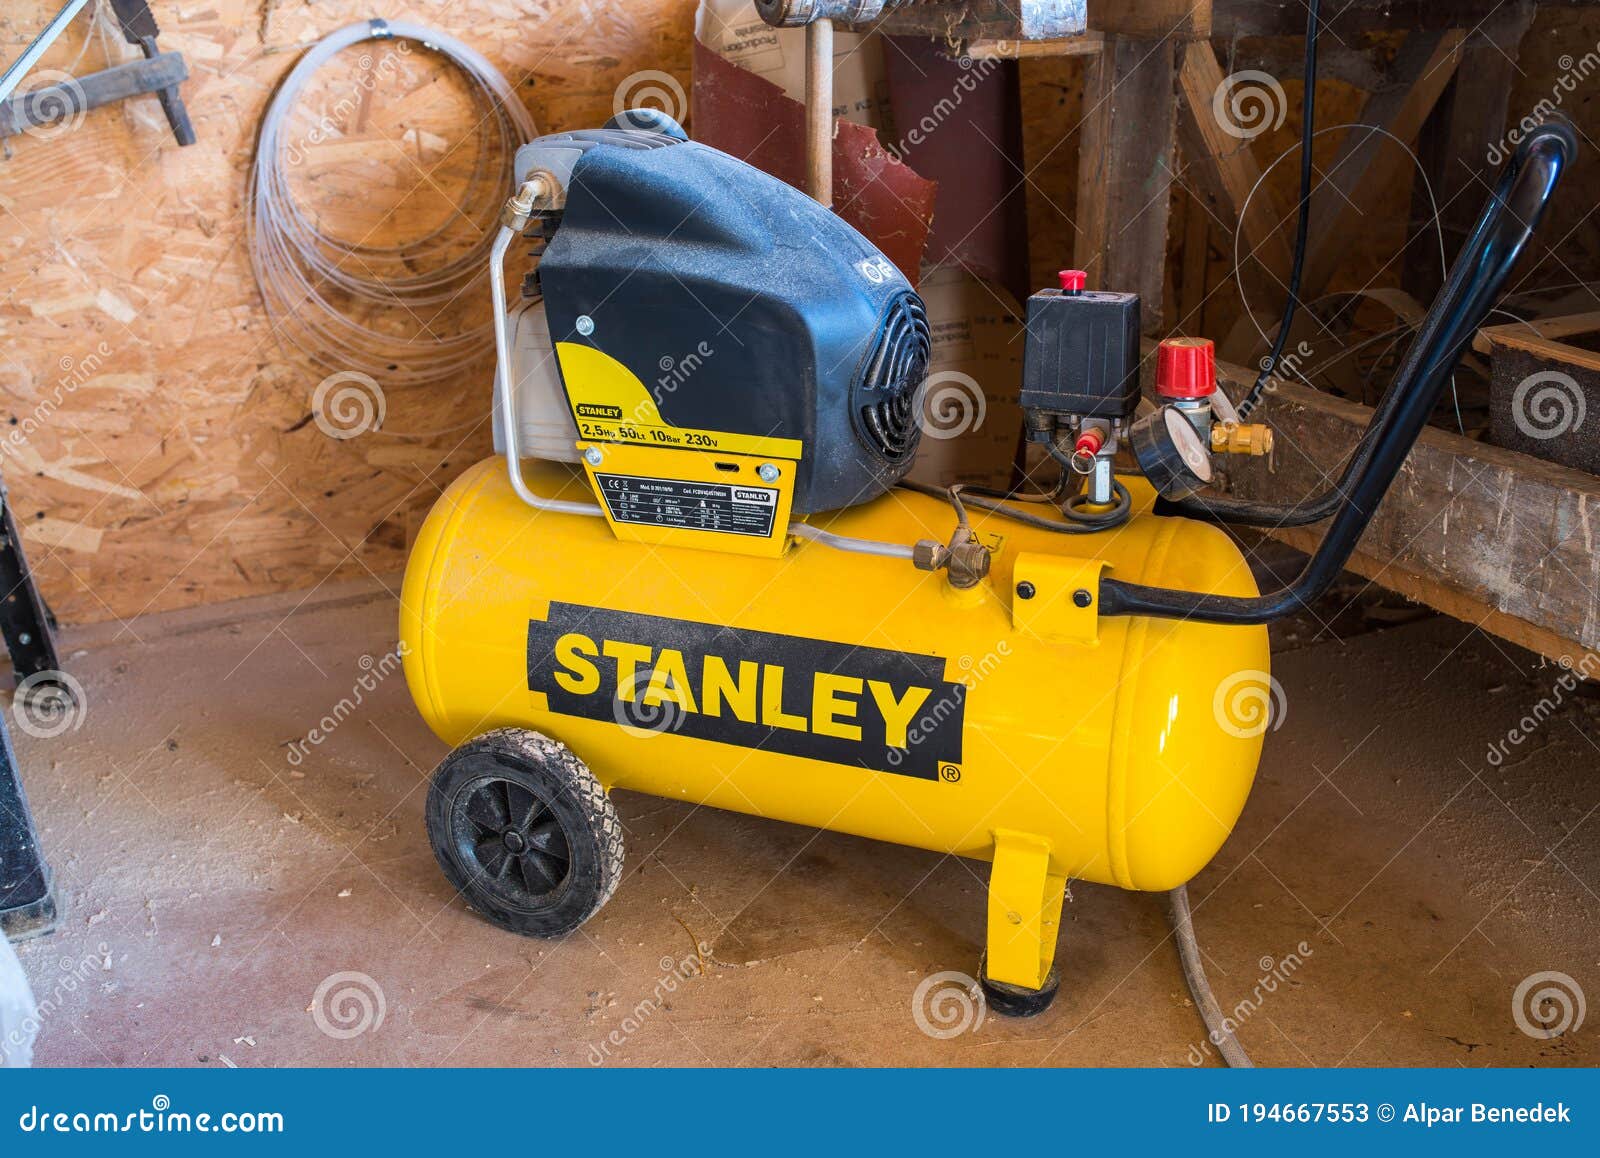 Used Dirty Stanley Air Compressor in a Small Woodworking Shop. Editorial  Stock Photo - Image of cylinder, instrument: 194667553